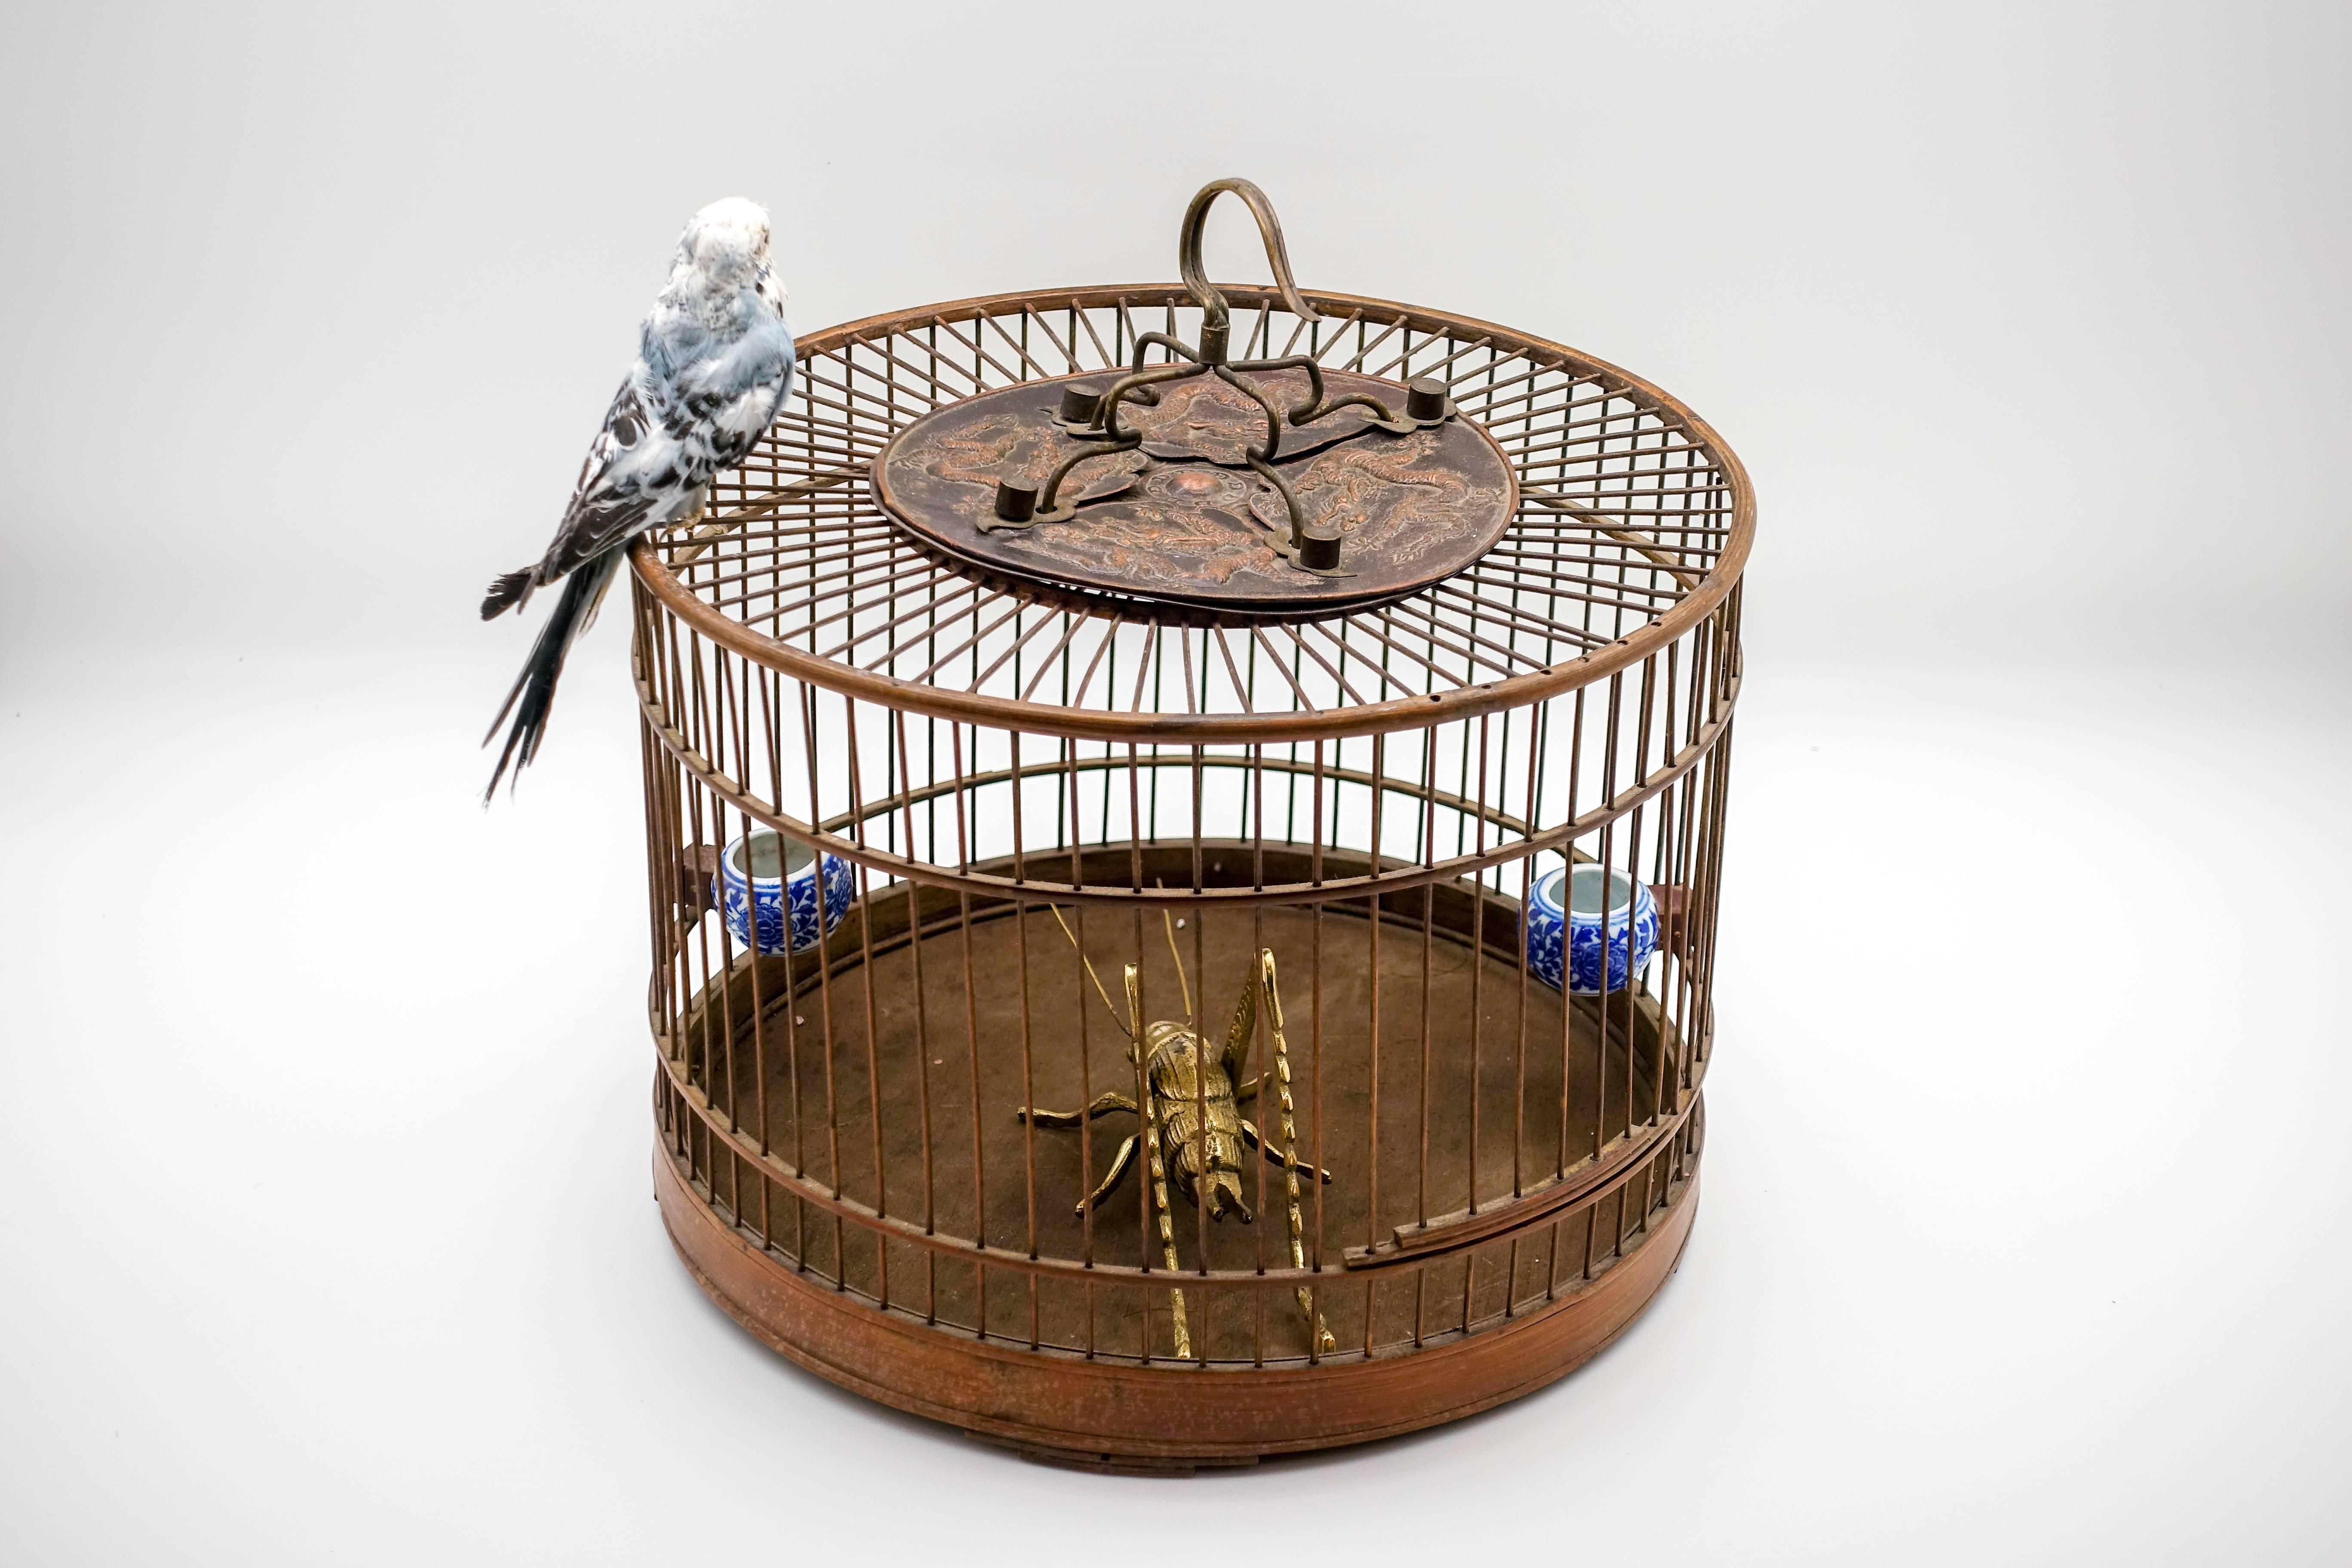 Keeping crickets as pets or for fighting emerged in China in early antiquity. This early 20th century wooden bamboo cage is decorated with elaborate metal fittings and blue and white ceramic feeders. A brass cricket is caged whilst his blue bird